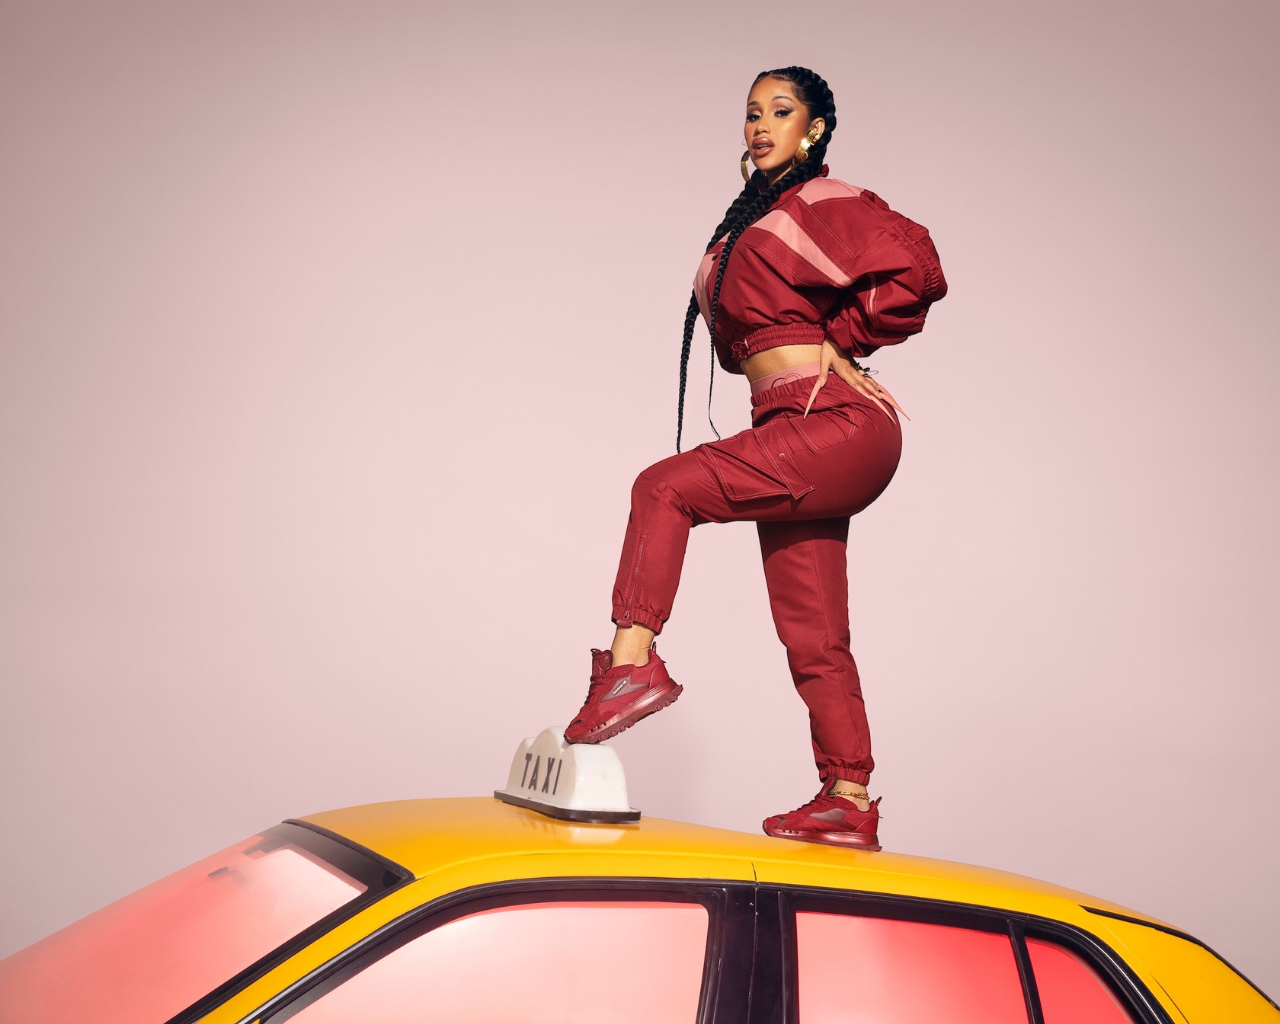 Cardi B "Let Me Beâ€¦In My World" Reebok collection